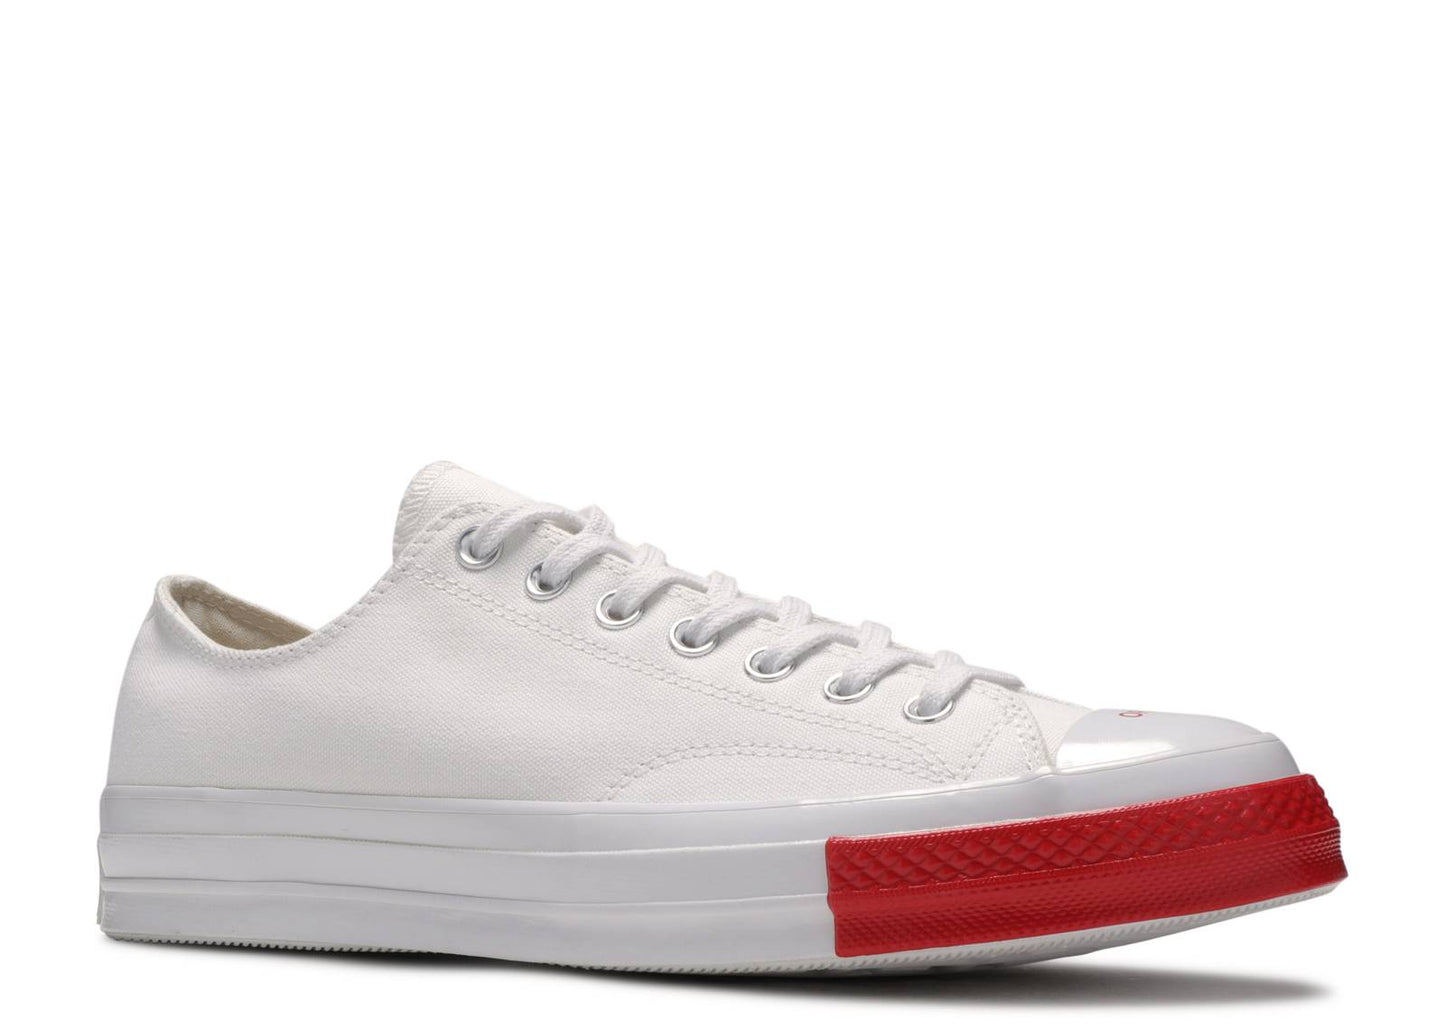 Undercover x Converse Chuck 70 OX Low "White/Red"